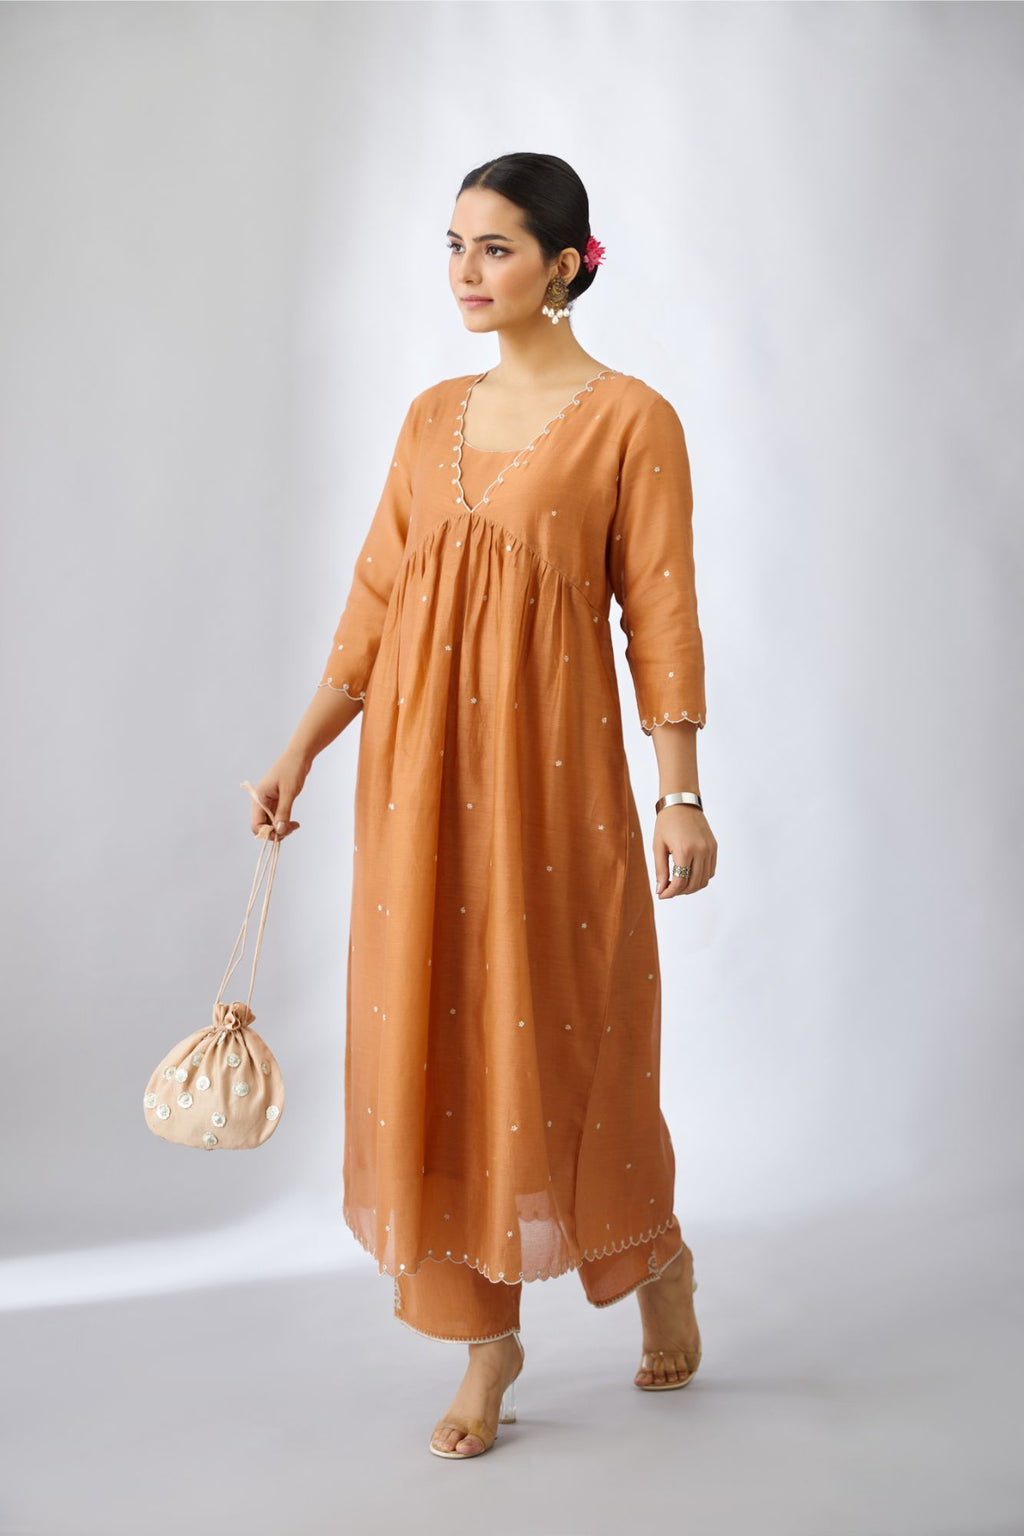 Copper silk chanderi kurta set with delicate silver zari flowers and scalloped edges highlighted with hand attached mirrors.